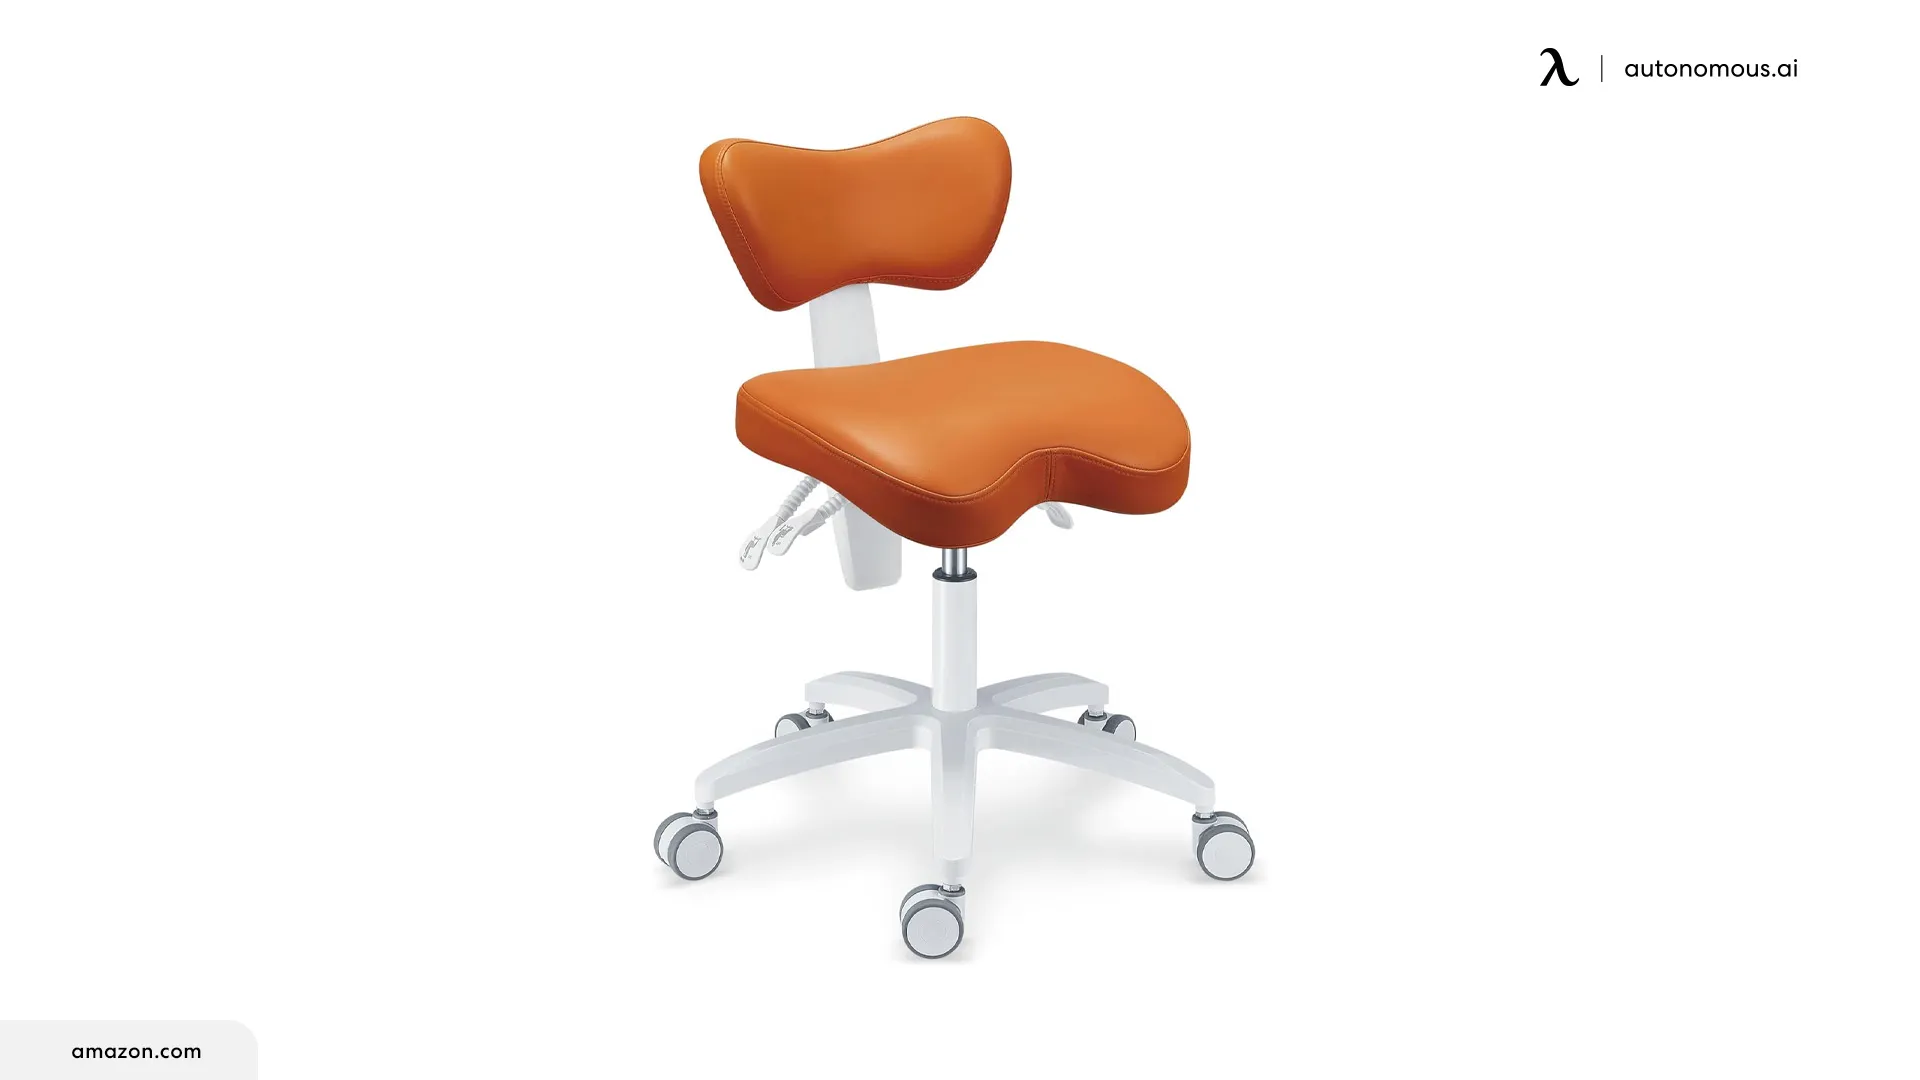 Castanai Back Support Saddle Stool Chair